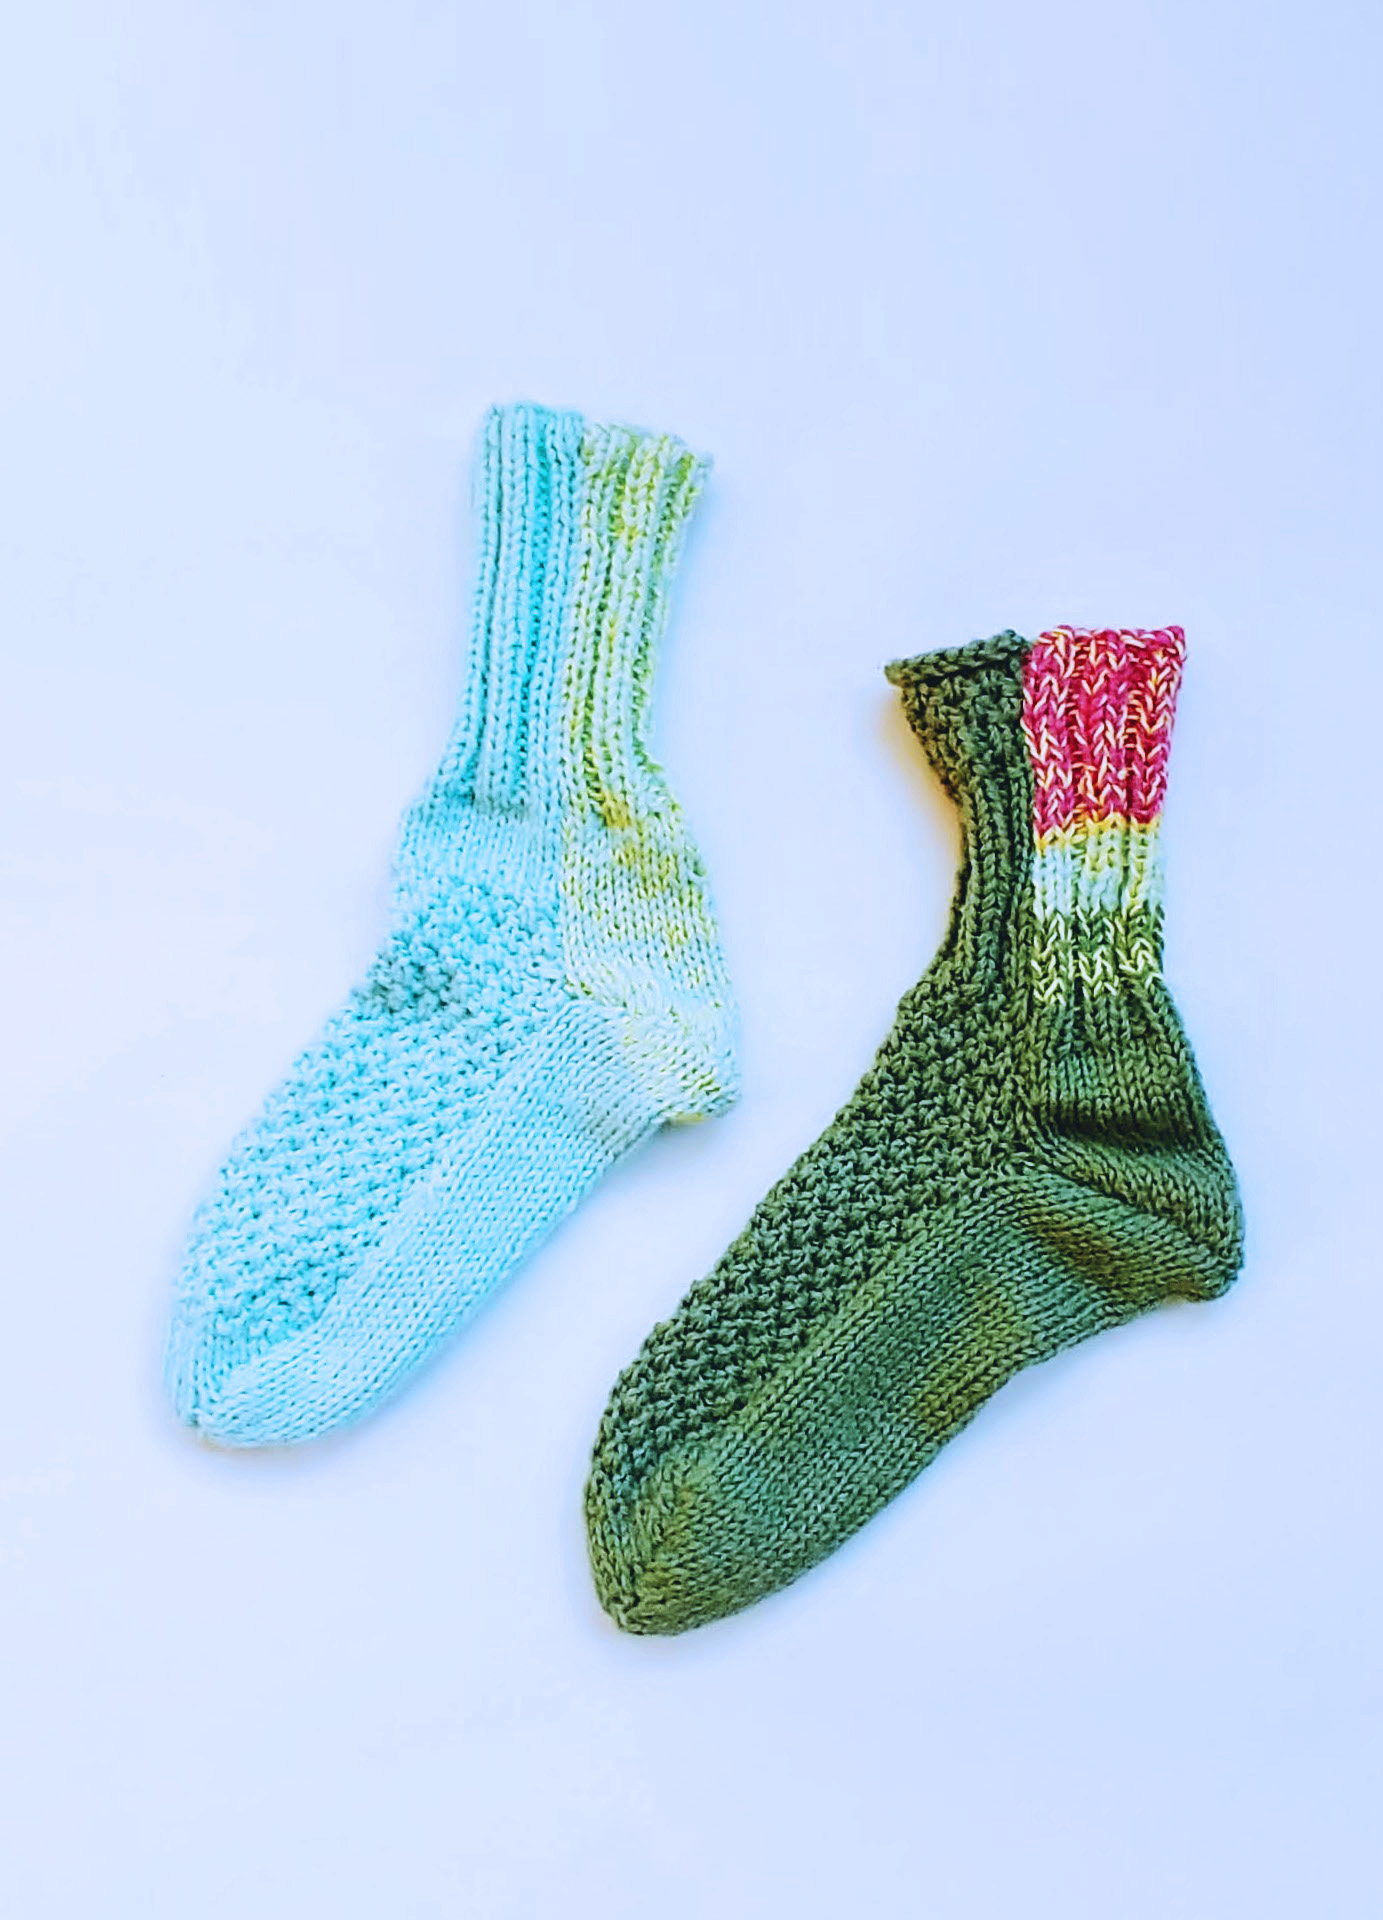 Two Knitted Socks - Blue and Green